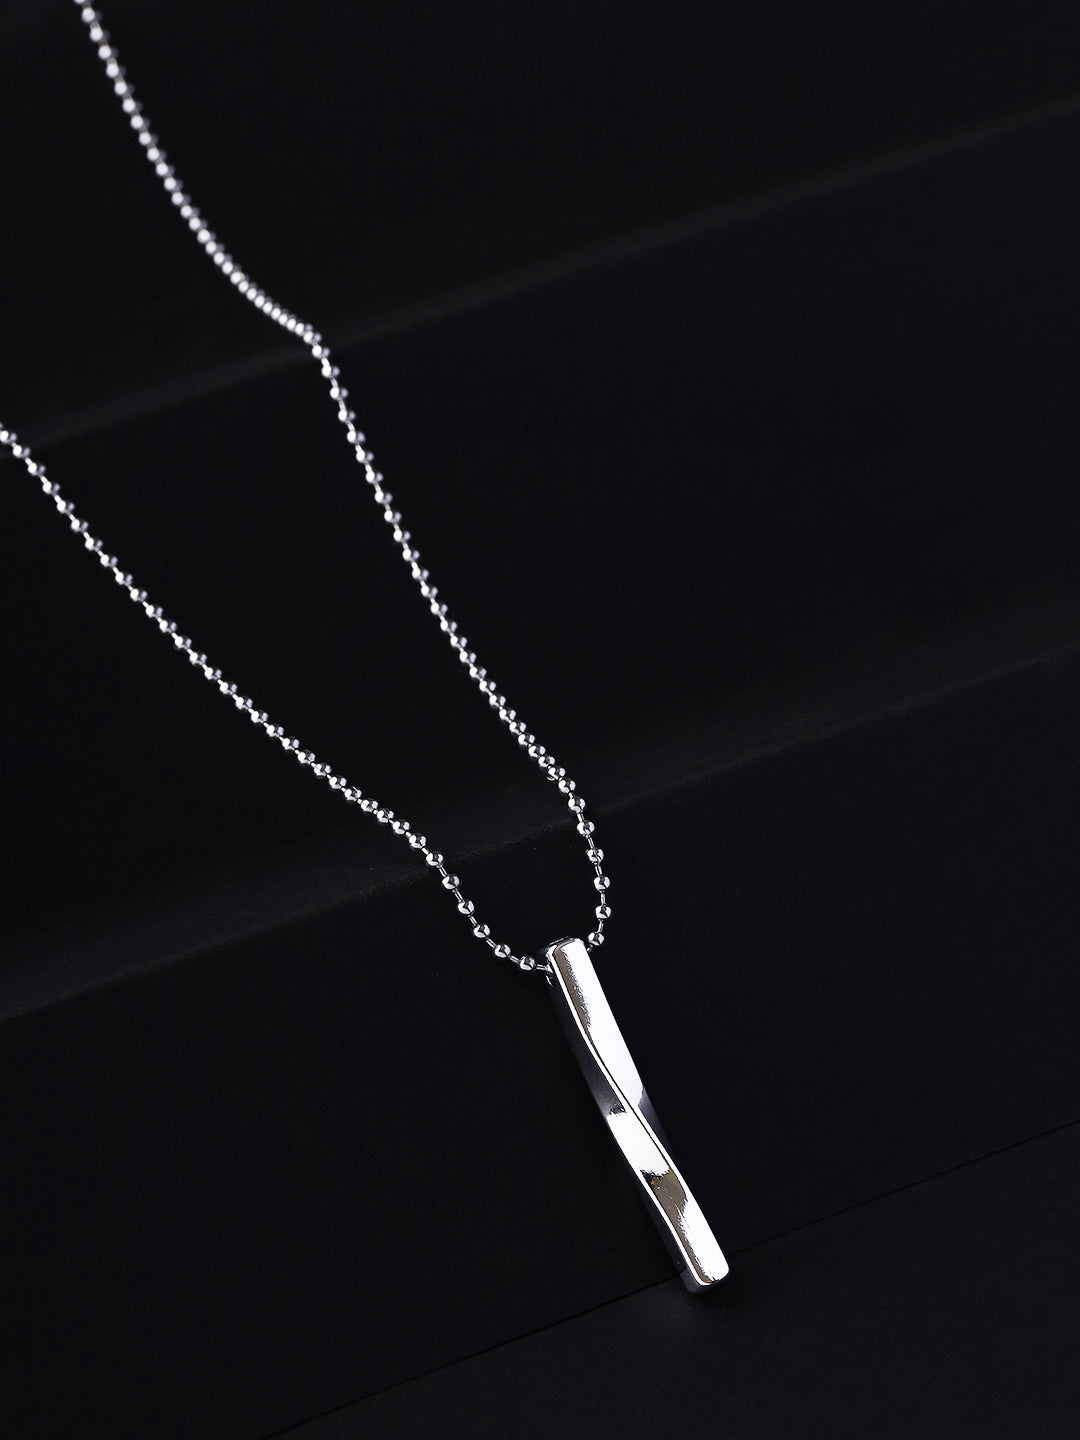 Bold by Priyaasi A silver-plated men's chain with a pendant